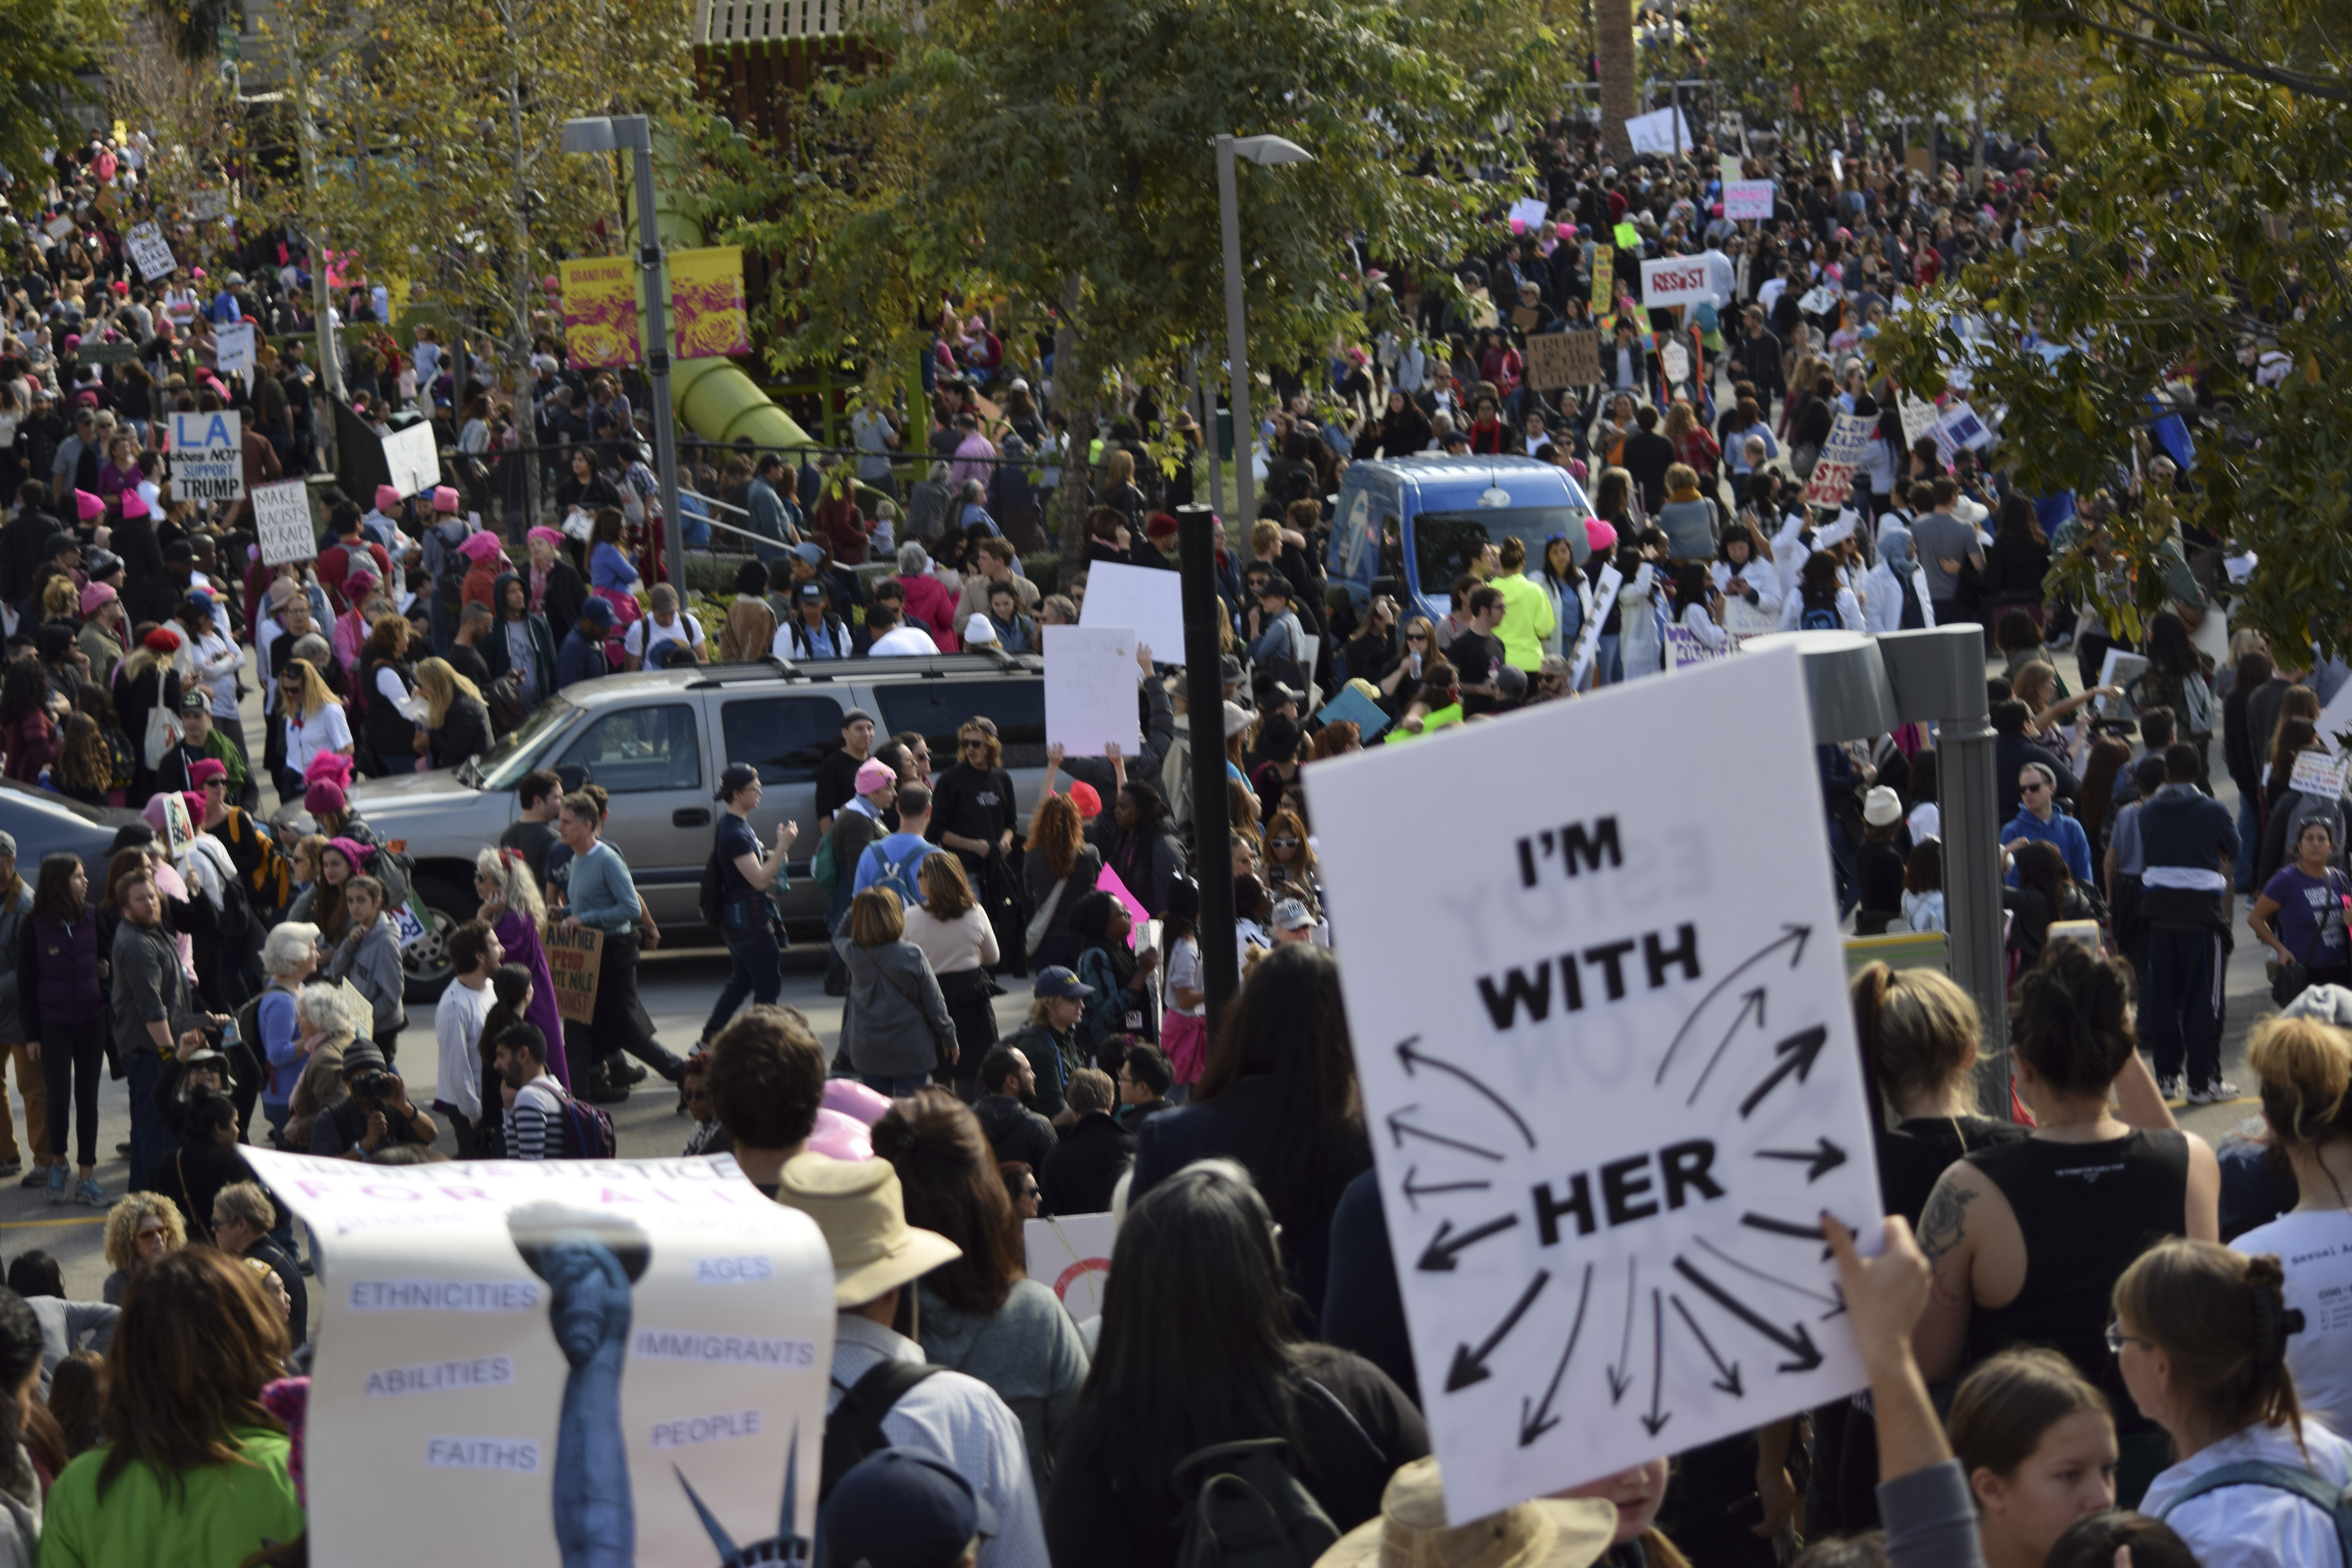 an image of a crowd of protesters at the Women's March. In the foreground one protester holds a sign saying I'm With Her, with arrows pointing in every direction to indicate fellow protesters